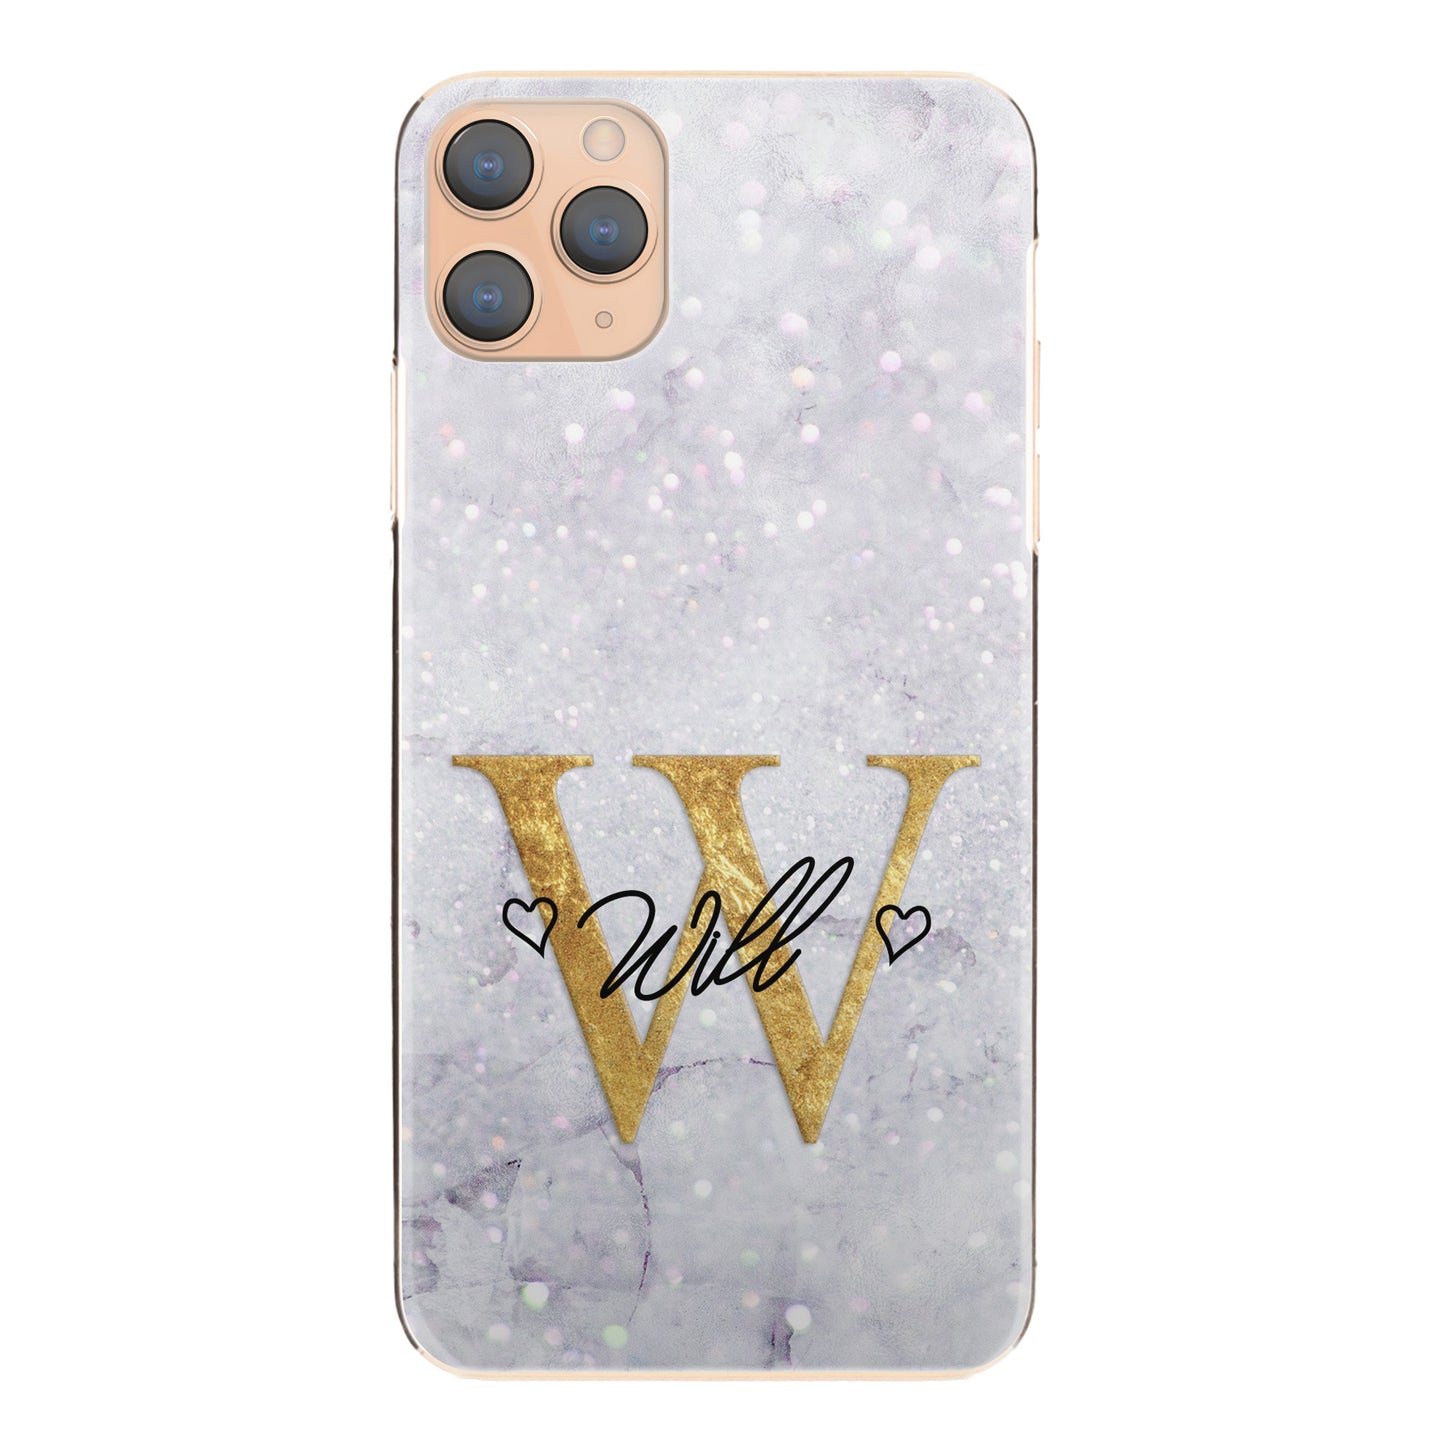 Personalised HTC Phone Hard Case with Gold Initial and Heart Accented Text on Crystal Marble